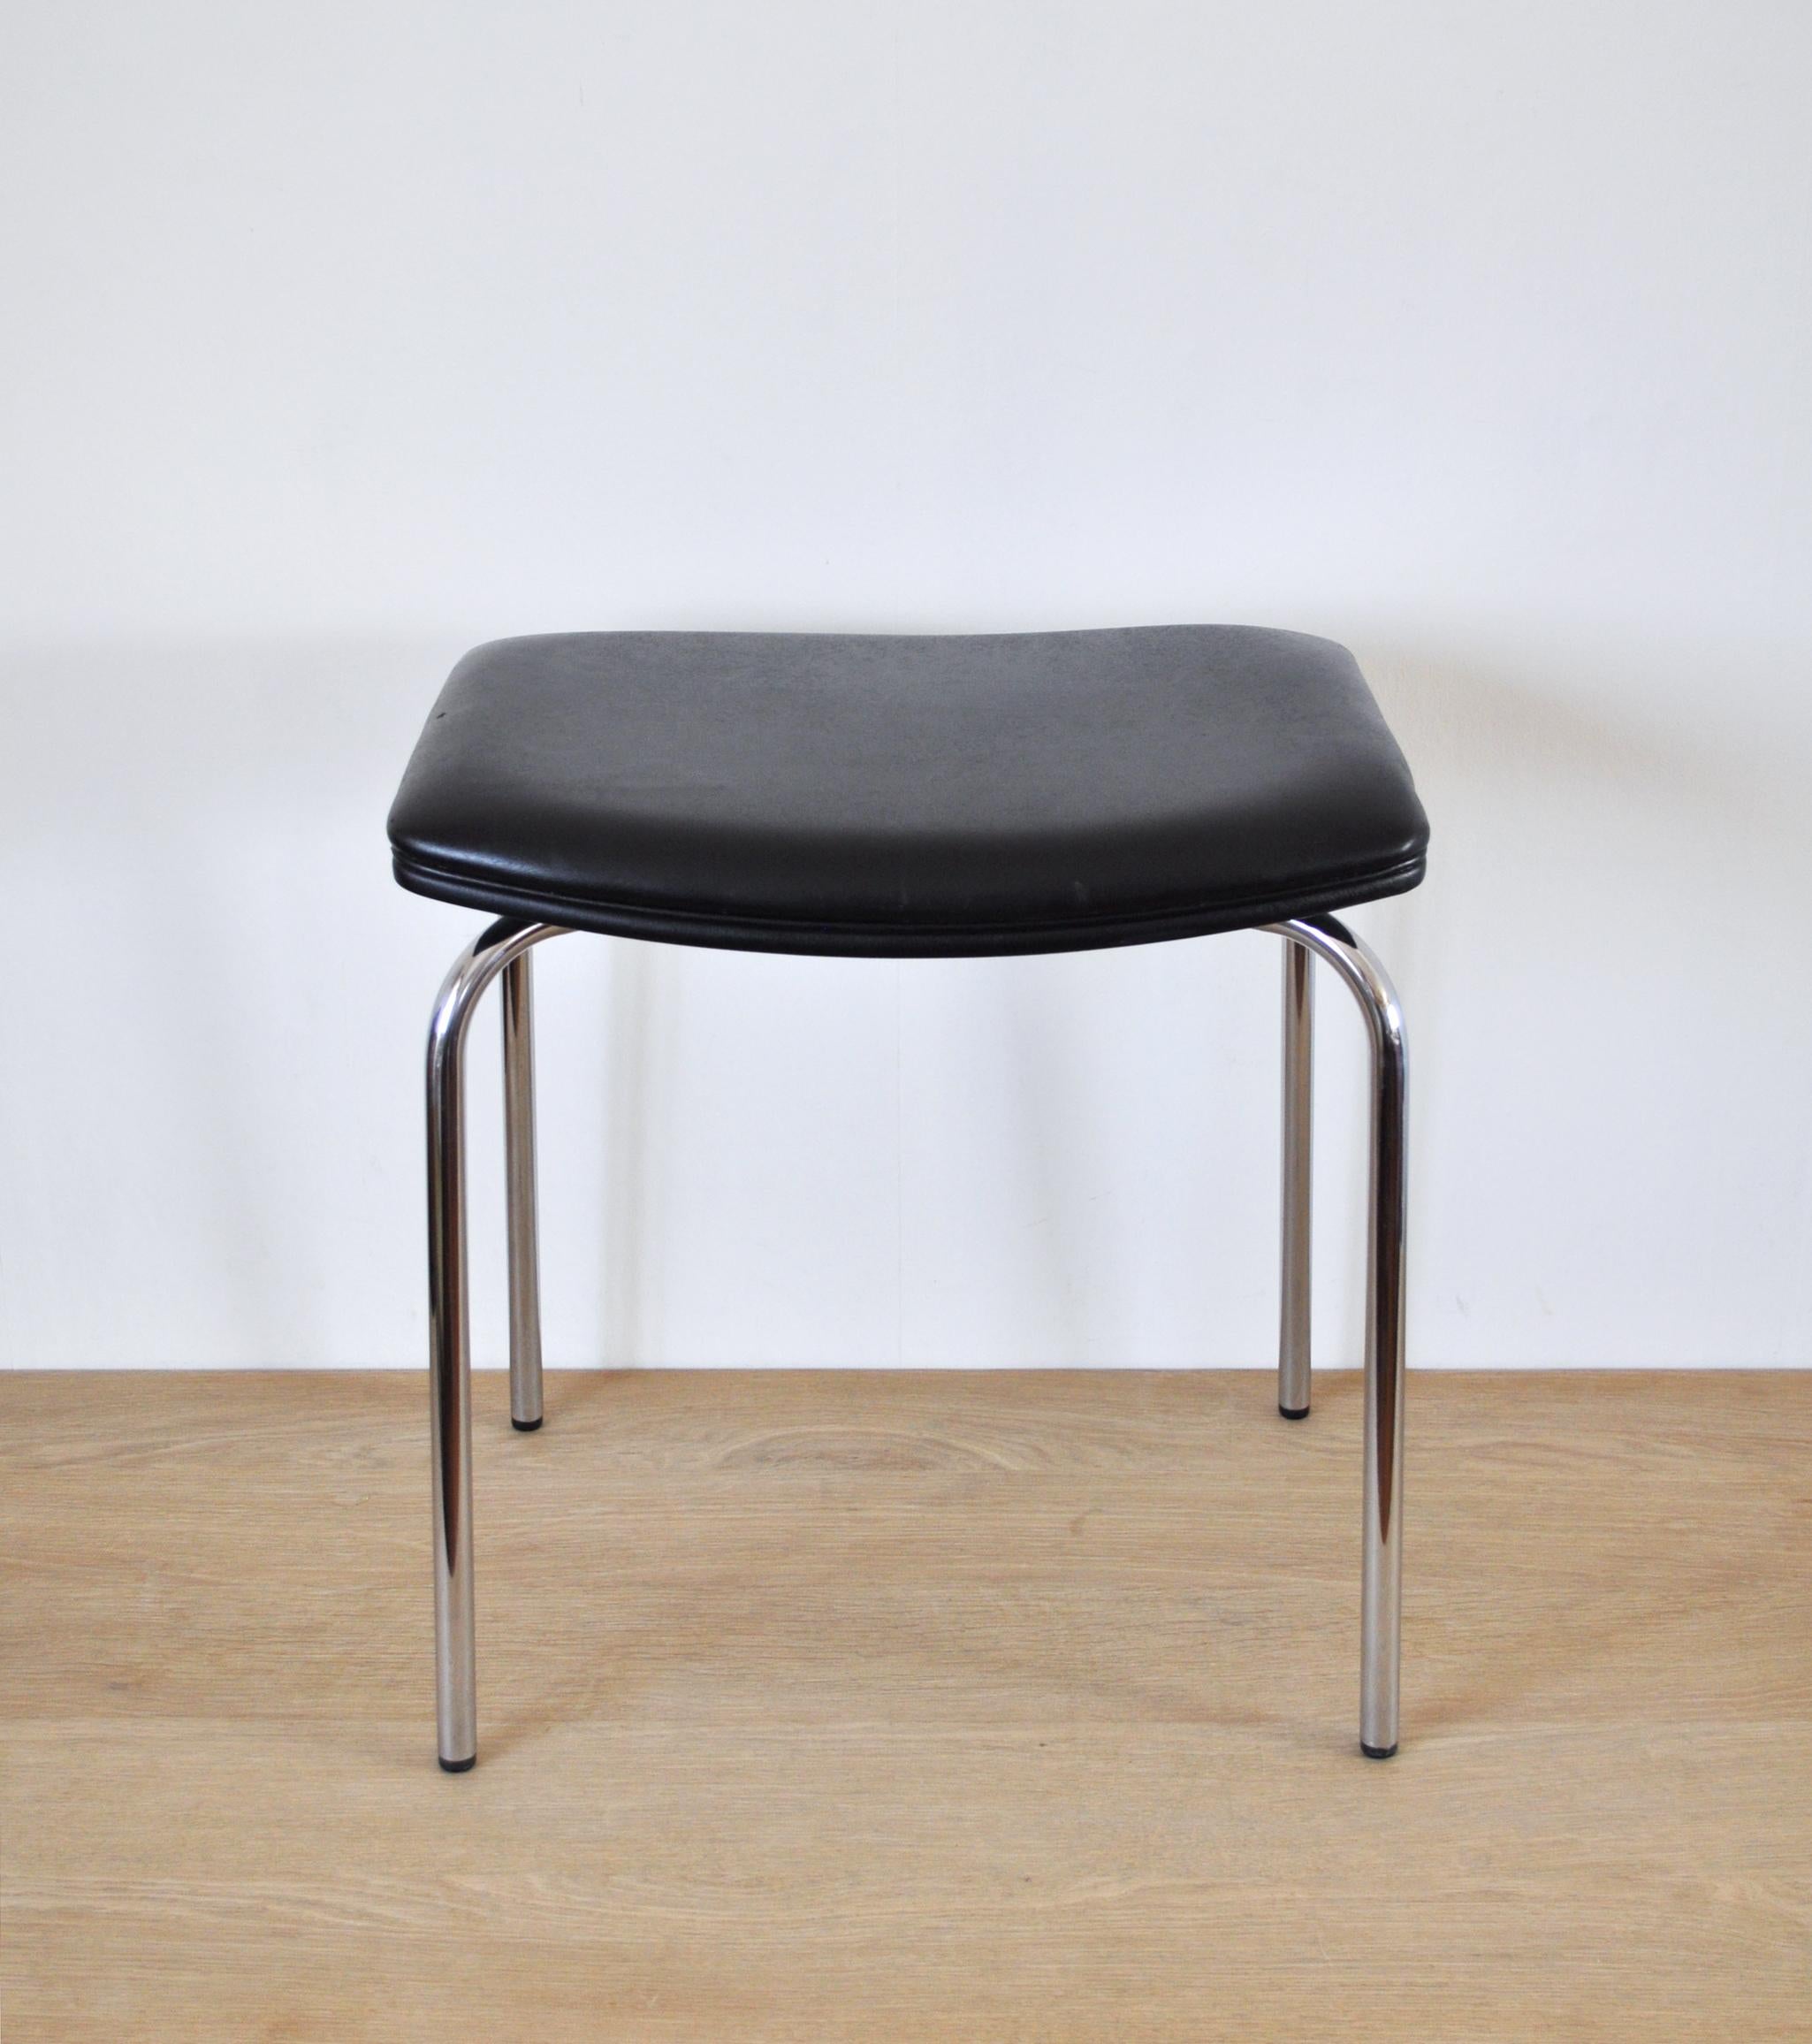 Danish mid-century stool made by Duba.
Labeled by the maker and Danish Furniture Makers.
Fine vintage condition with few signs of wear.
    